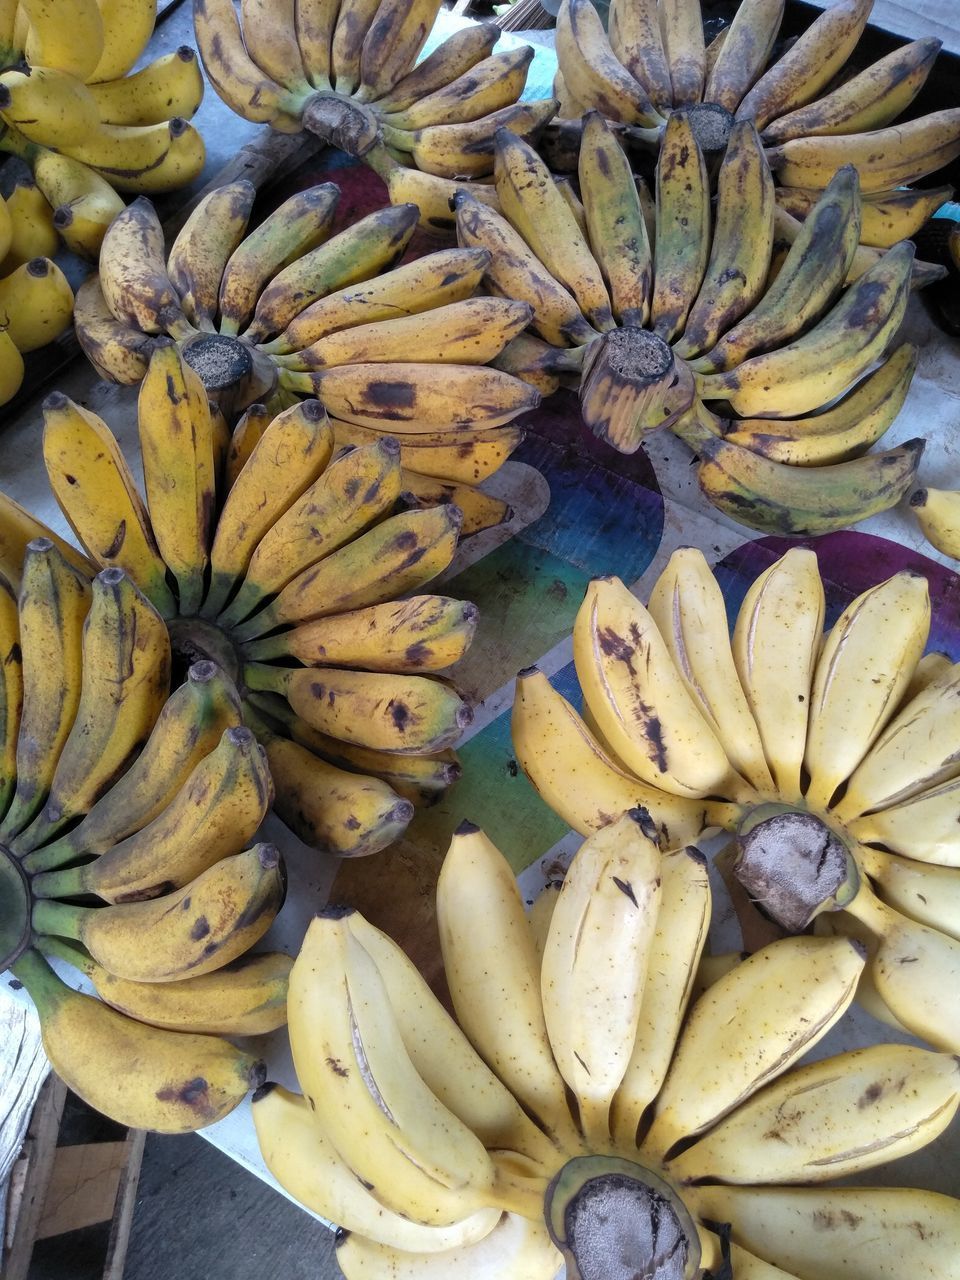 CLOSE-UP OF FRUITS FOR SALE IN MARKET